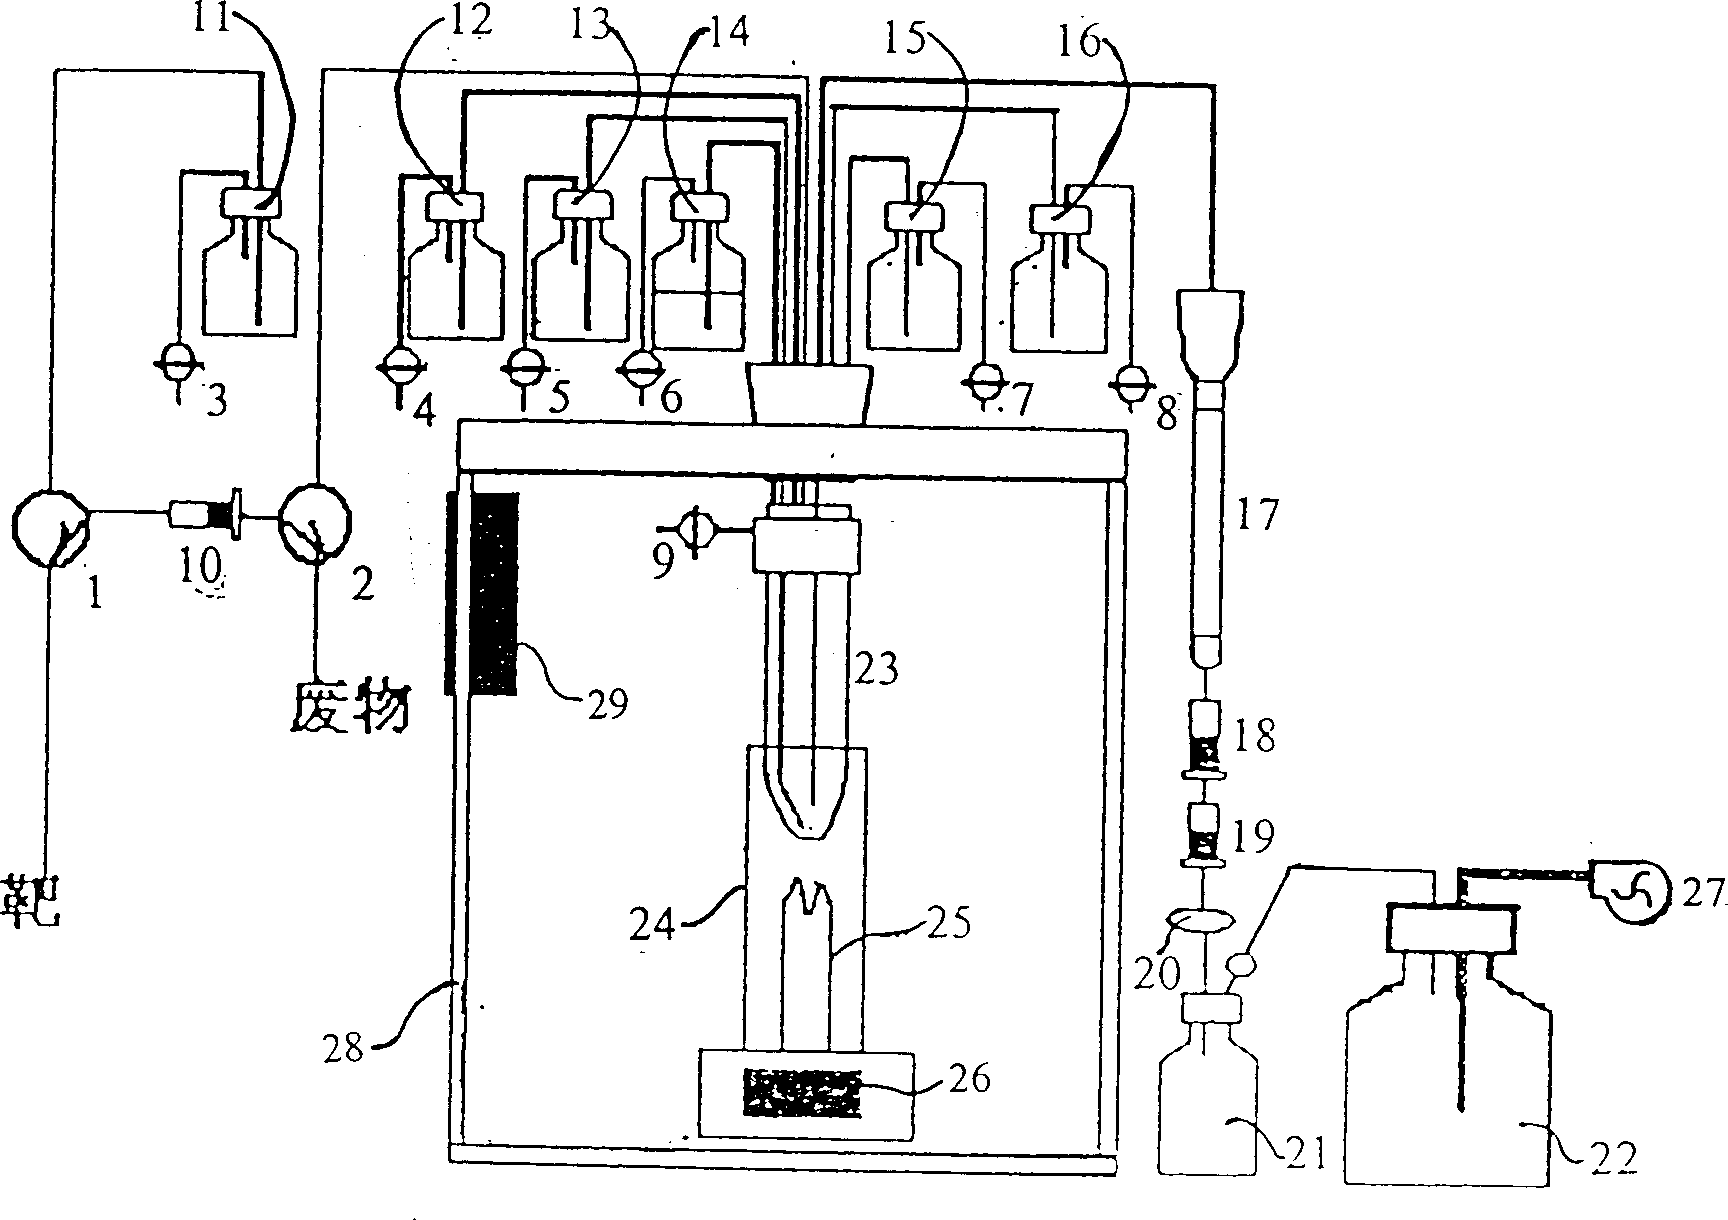 Prepn apparatus and process for 2-fluoro-18 substituent-2 deoxy-beta-D-glucose